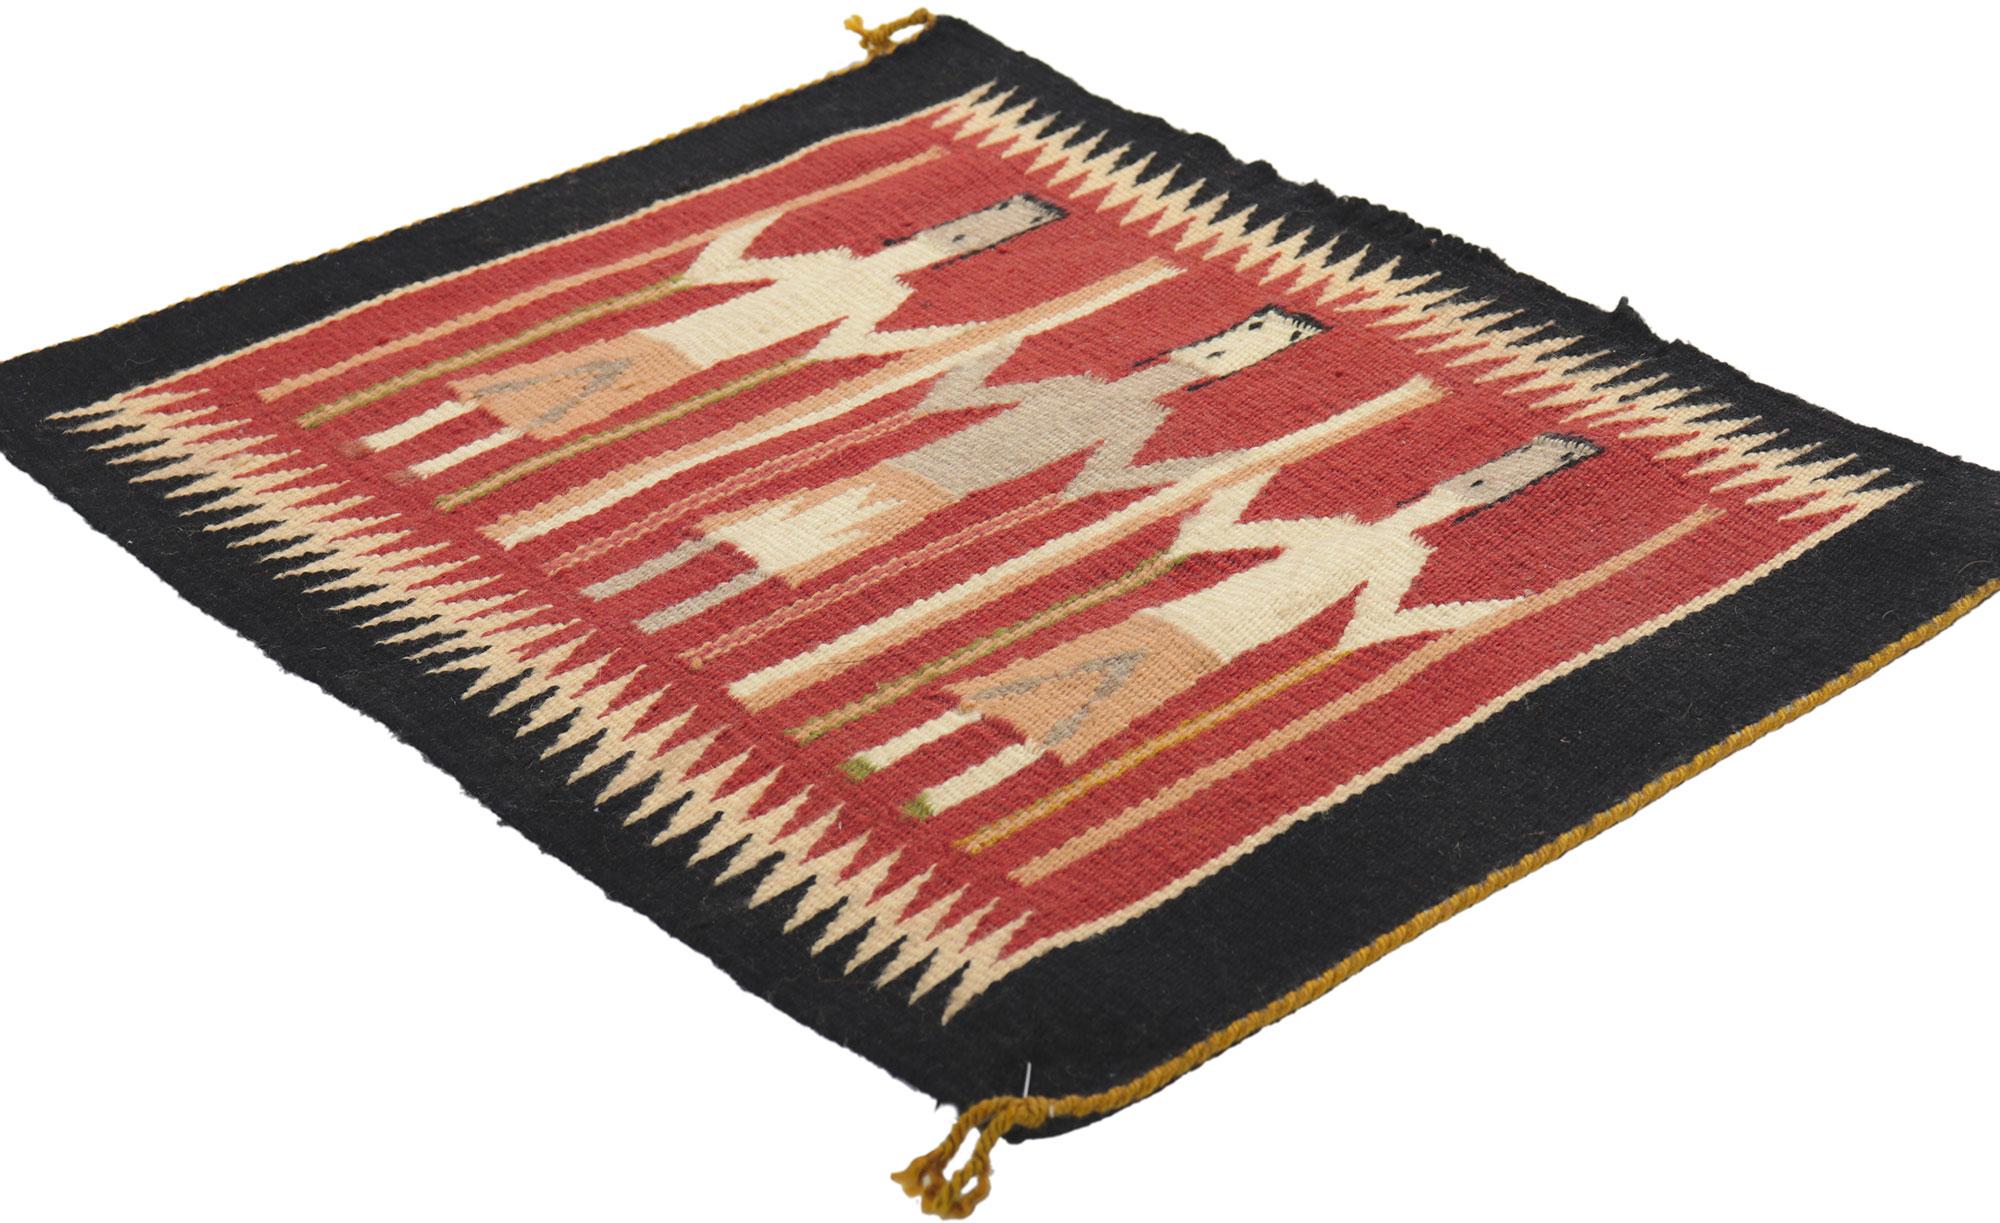 78426 Vintage Navajo Yeibichai Rug, 01'06 x 01'10. Yeibichai Navajo rugs are intricately handwoven textiles that depict figures from the Yeibichai dance, a ceremonial practice central to Navajo mythology and healing rituals. These rugs feature